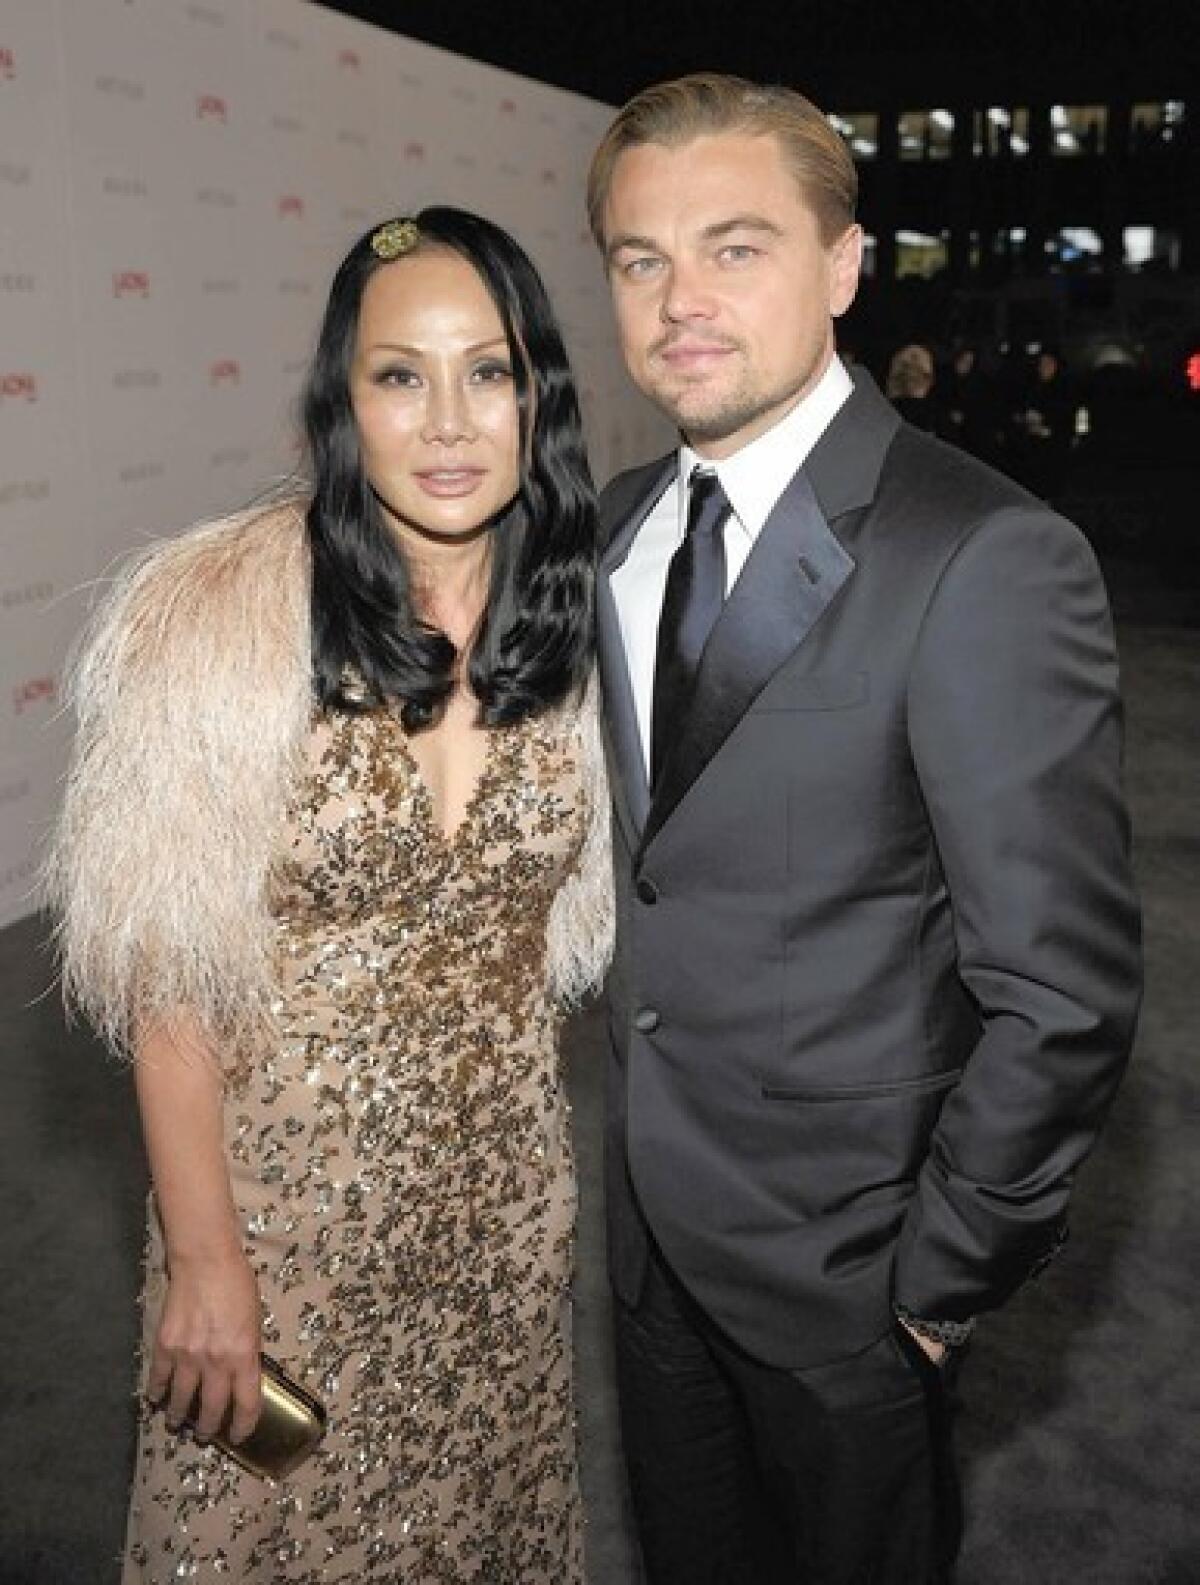 Eva Chow and Leonardo DiCaprio are co-chairing the Art and Film Gala for the Los Angeles County Museum of Art.